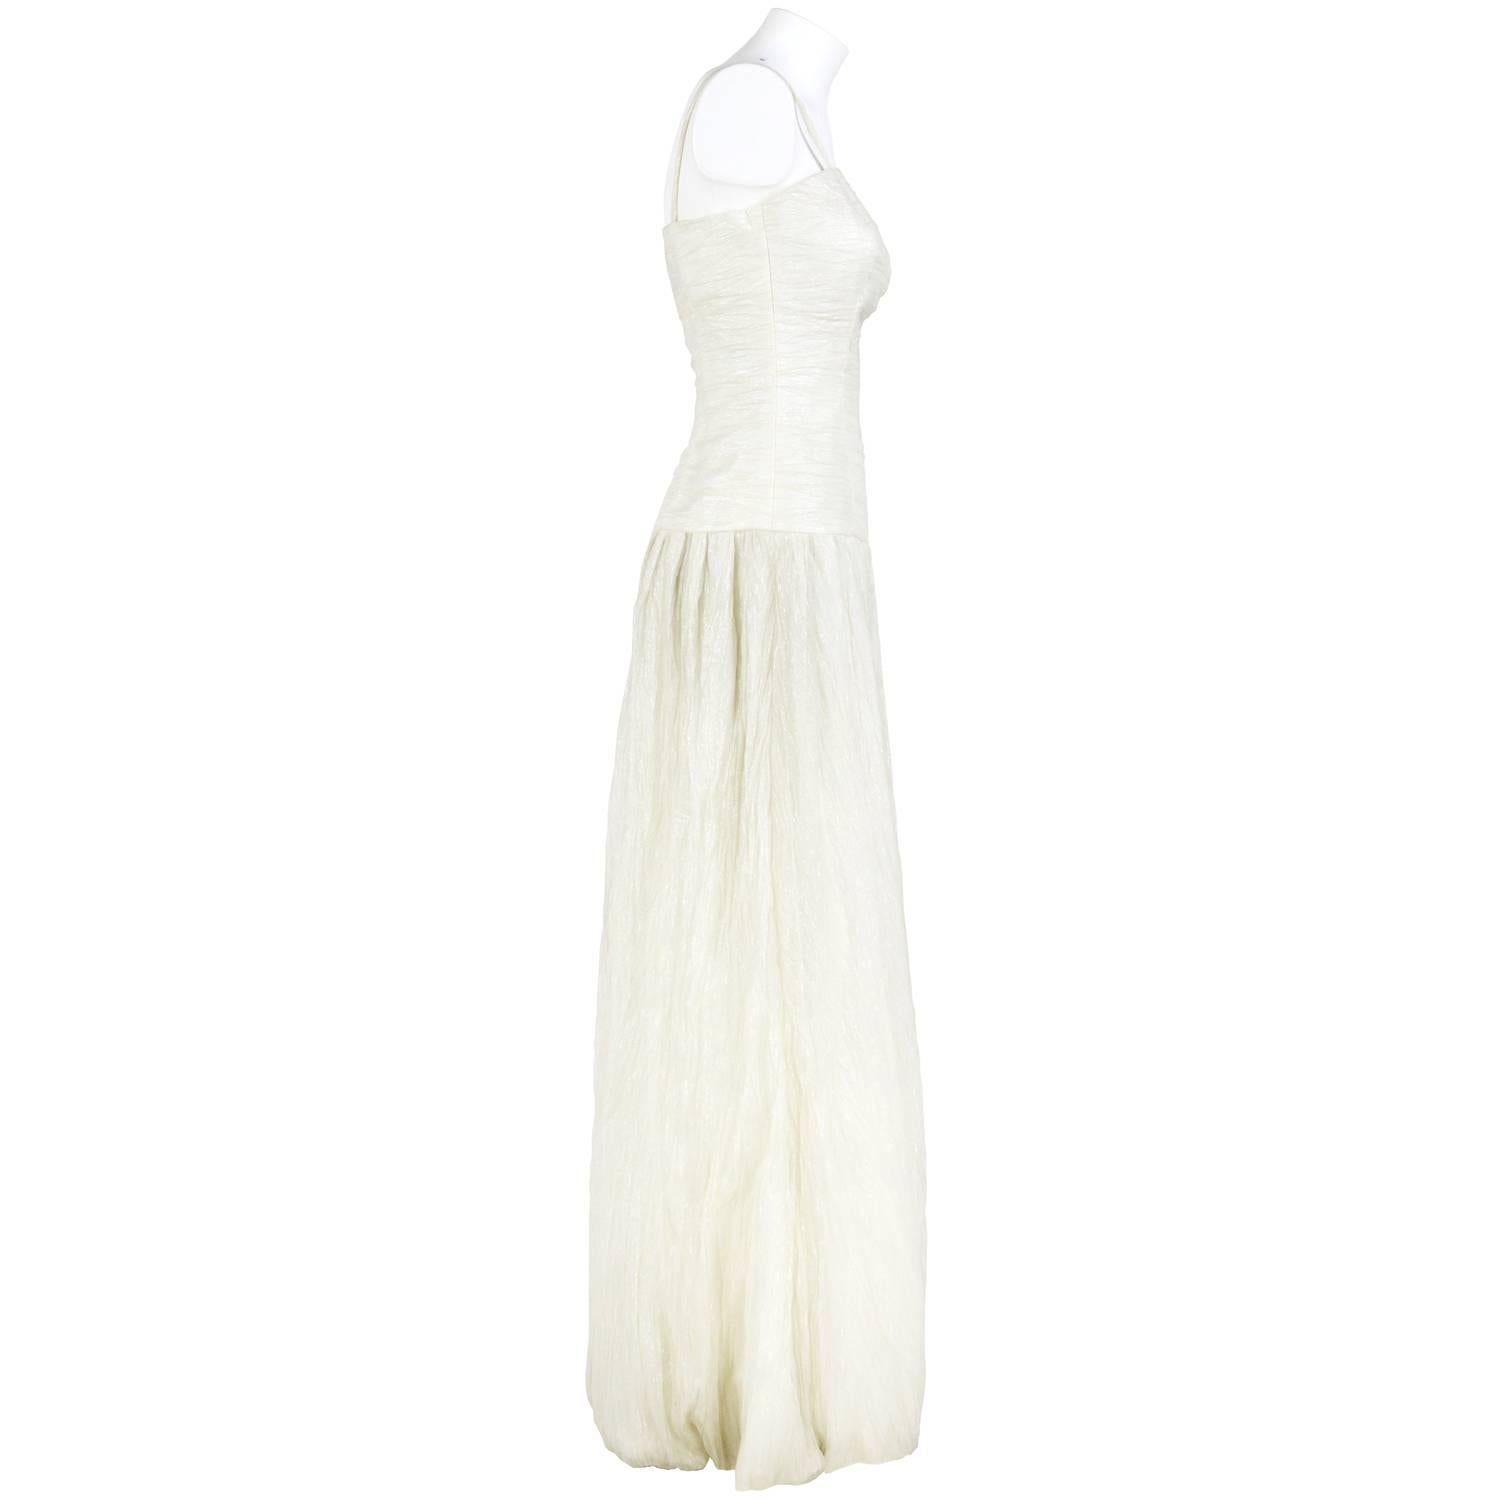 Beautiful Douglas vintage wedding dress in cream color with thin straps and wide skirt lightly pleated. The item was produced in the 2000s and is in excellent conditions.


Flat measurements
Height: 150 cm
Bust: 38 cm
Waist: 32 cm